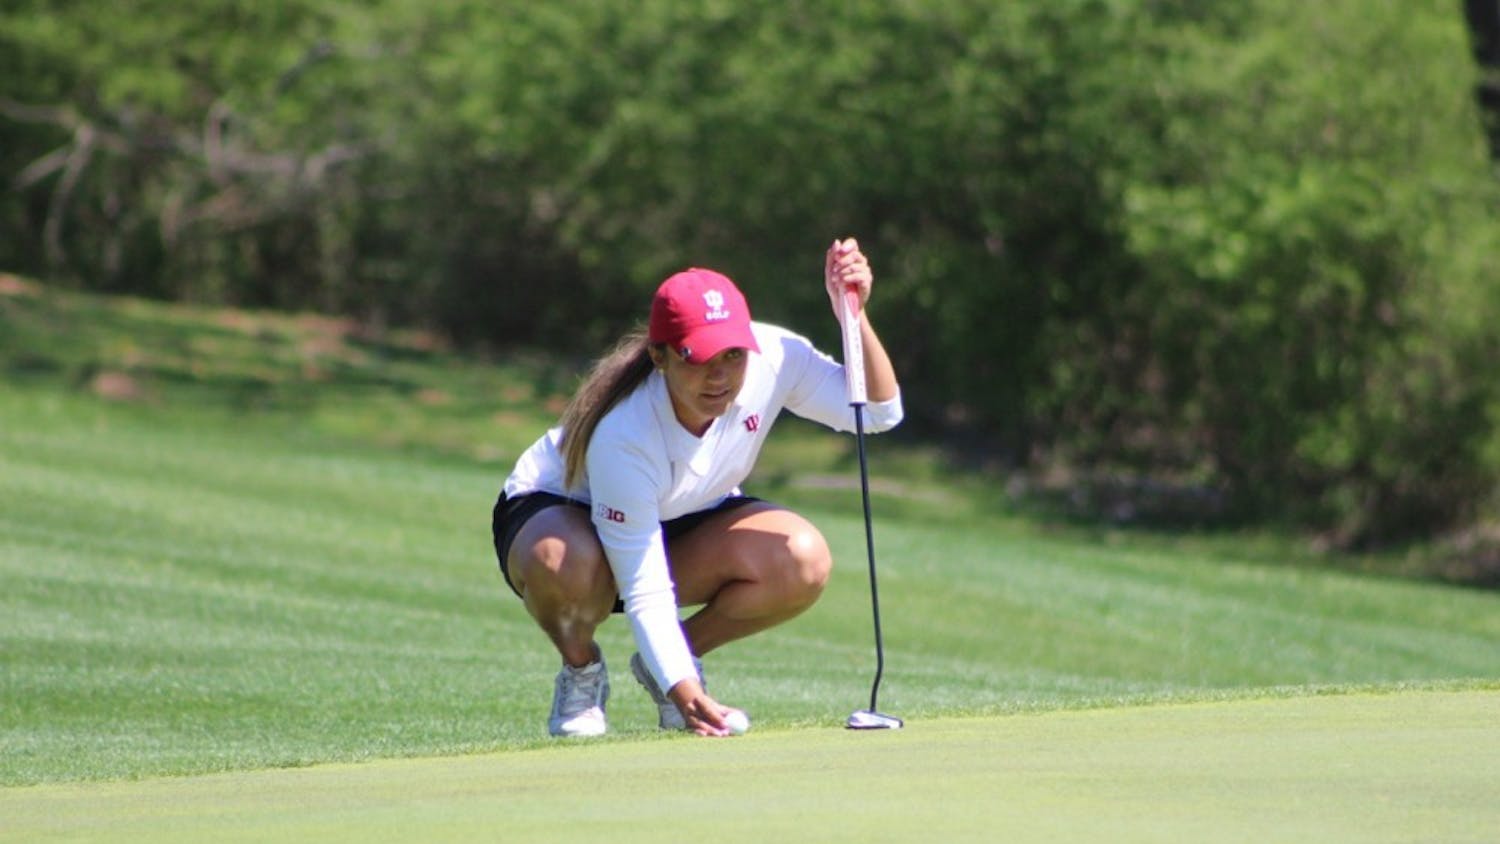 Senior Theresa-Ann Jedra lines up a putt as she competes Saturday in the IU Invitational at IU Golf Course. The senior posted a 3-over par Saturday after two rounds.